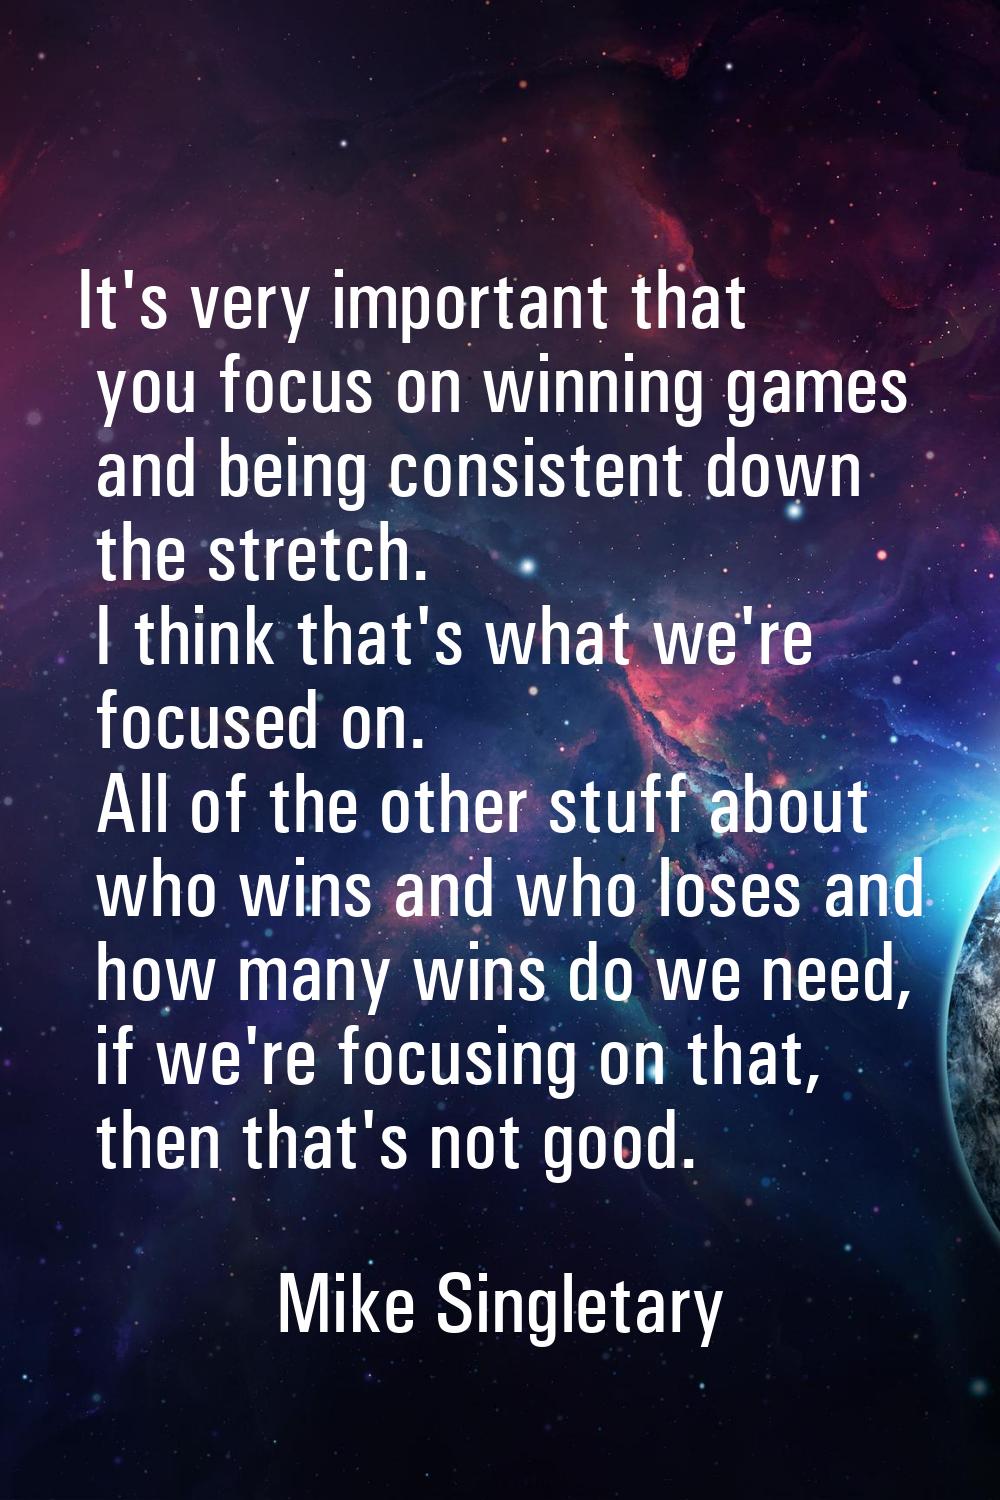 It's very important that you focus on winning games and being consistent down the stretch. I think 